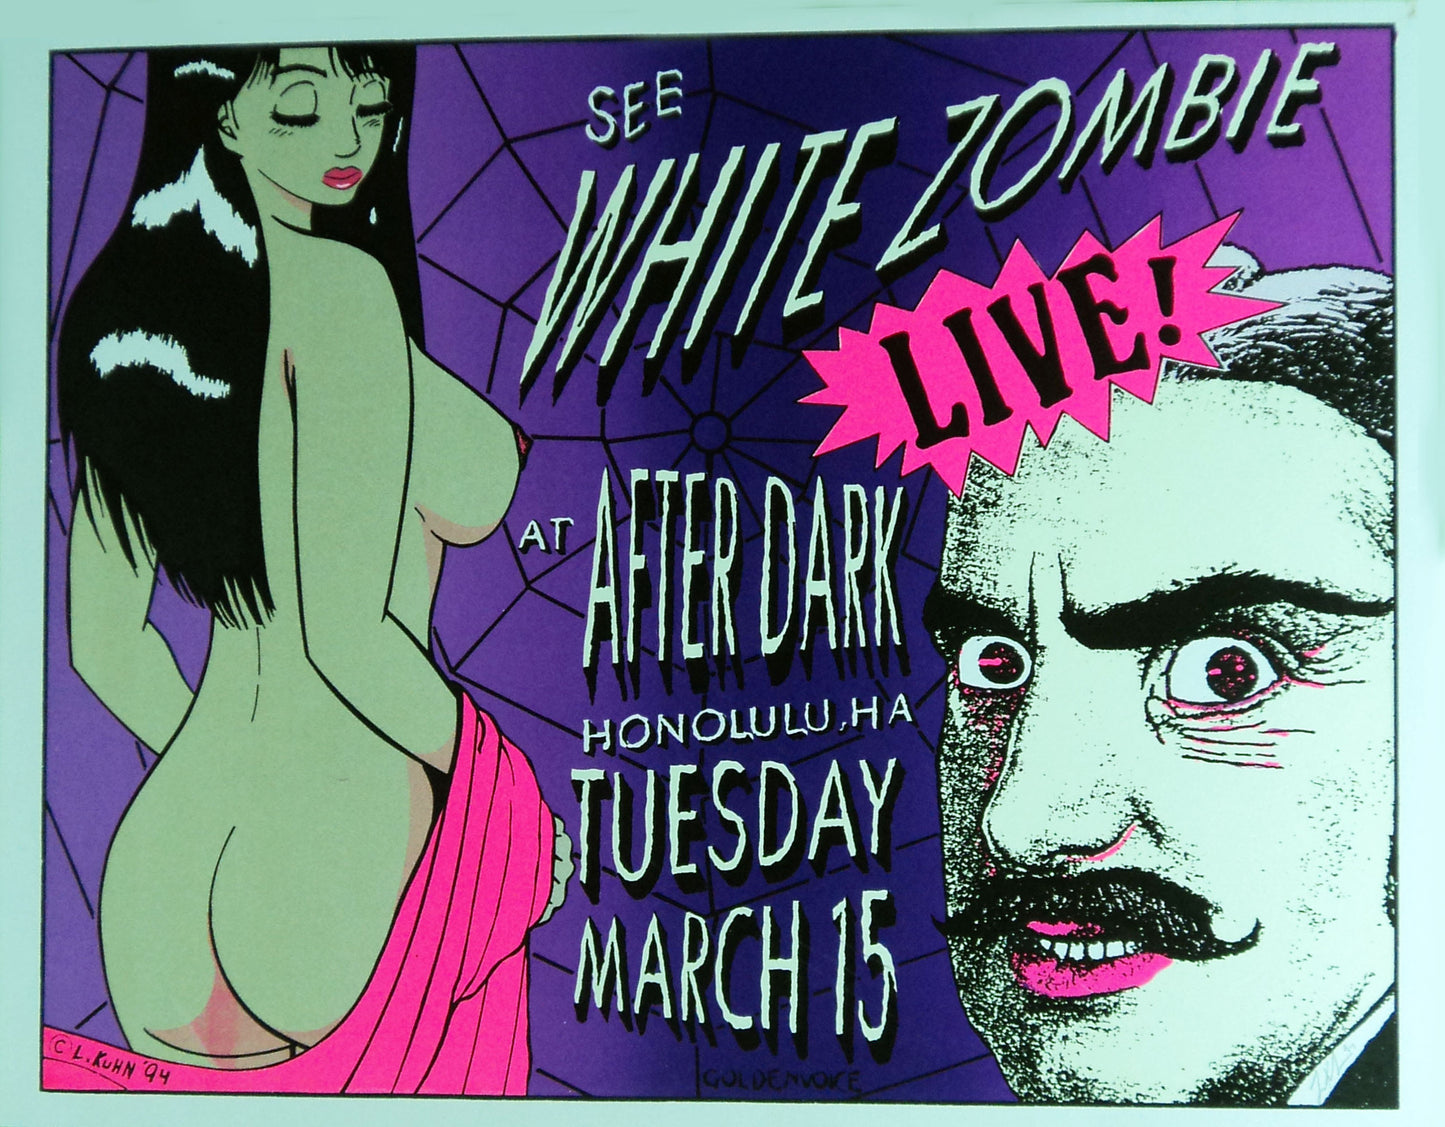 Lindsey Kuhn - 1994 - White Zombie Concert Poster